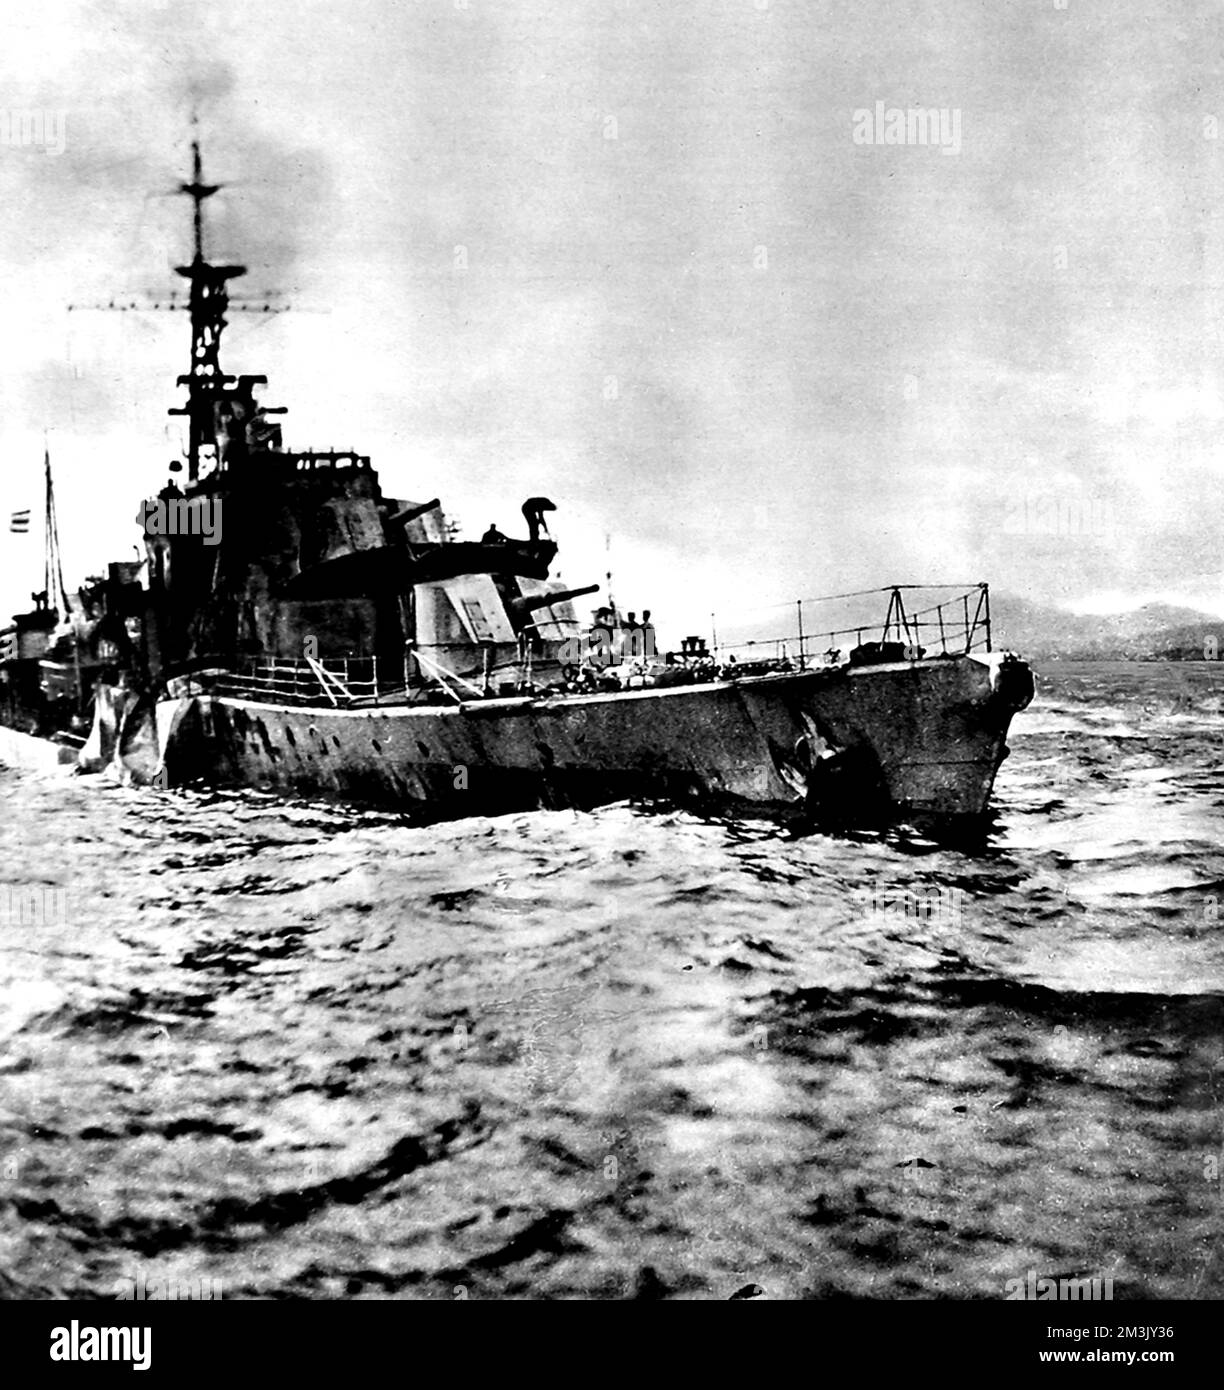 The damaged HMS 'Saumarez', pictured off the coast of Albania, after she had hit a mine, October 1946.   On the night of 22nd October the British destroyers HMS 'Saumarez' and 'Volage' hit mines in the channel between Corfu and Albania, sustaining heavy damage and casualties.     Date: 1946 Stock Photo